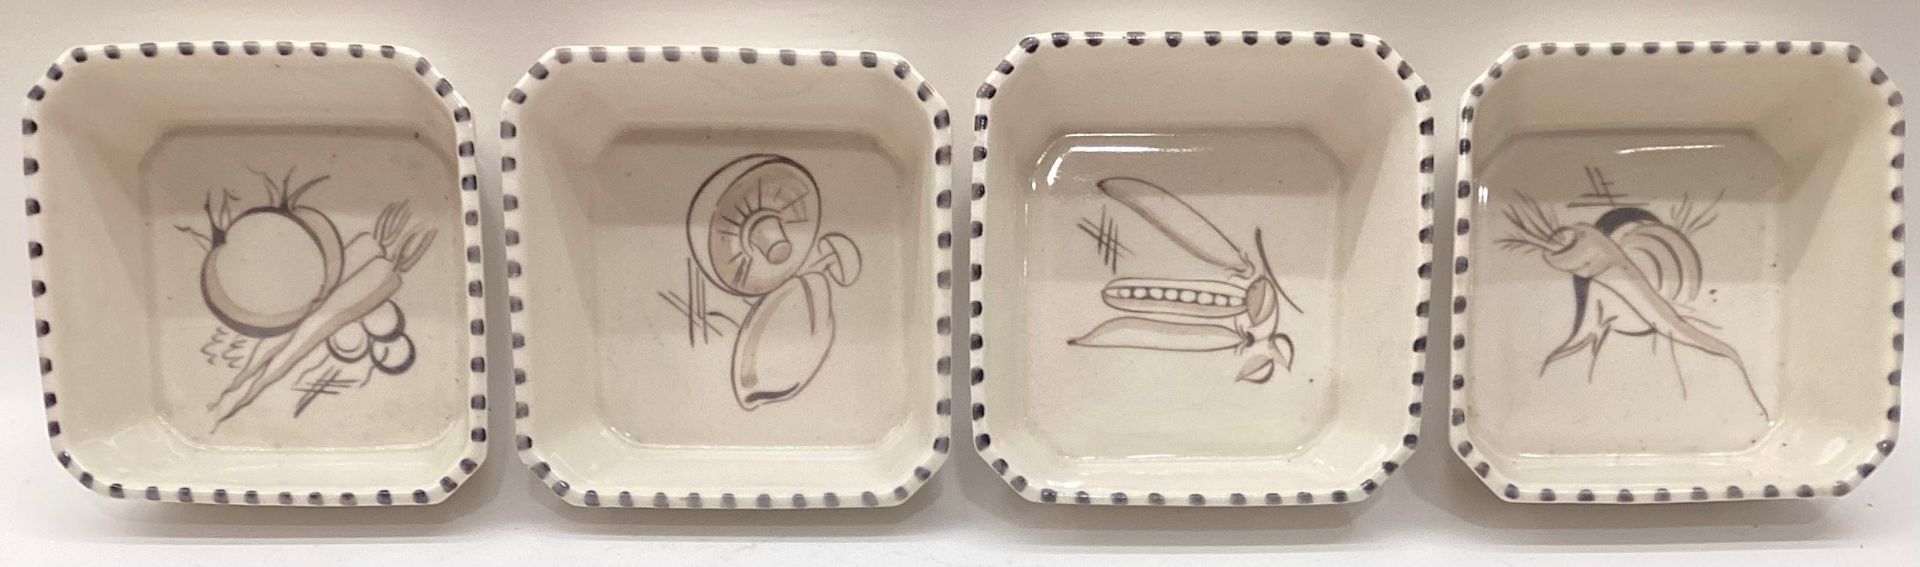 Poole Pottery shape 501 KU pattern complete set of hors d'oeuvres dishes in original wooden holder - Image 4 of 6